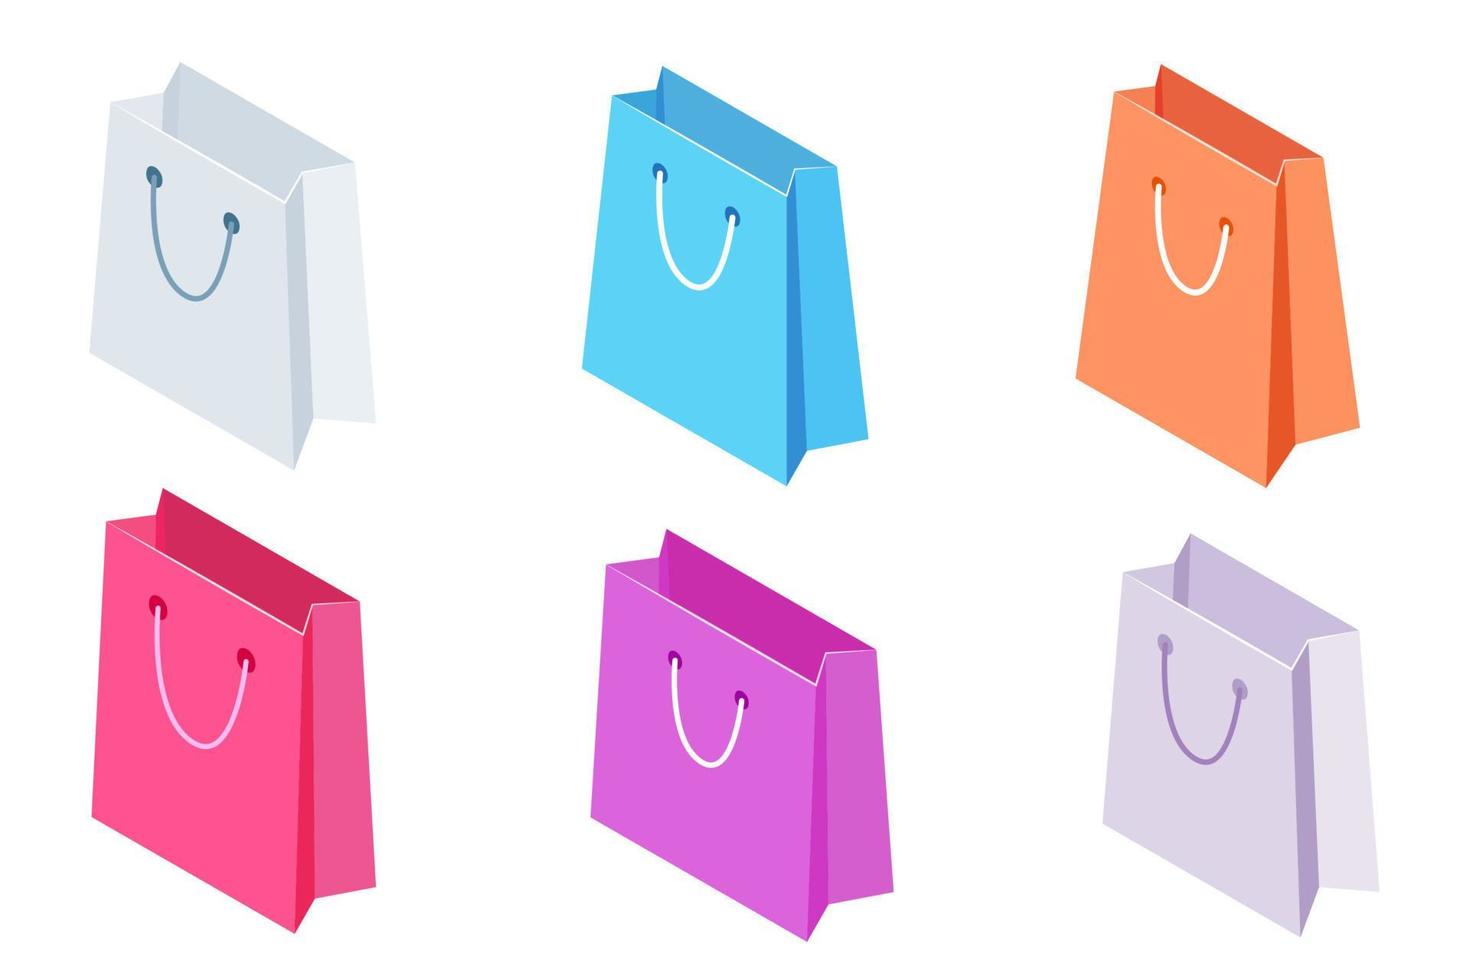 Isometric, 3D rendering shopping bags, colorful paper bags with handle isolated on white background. Isometric bag icon vector design.